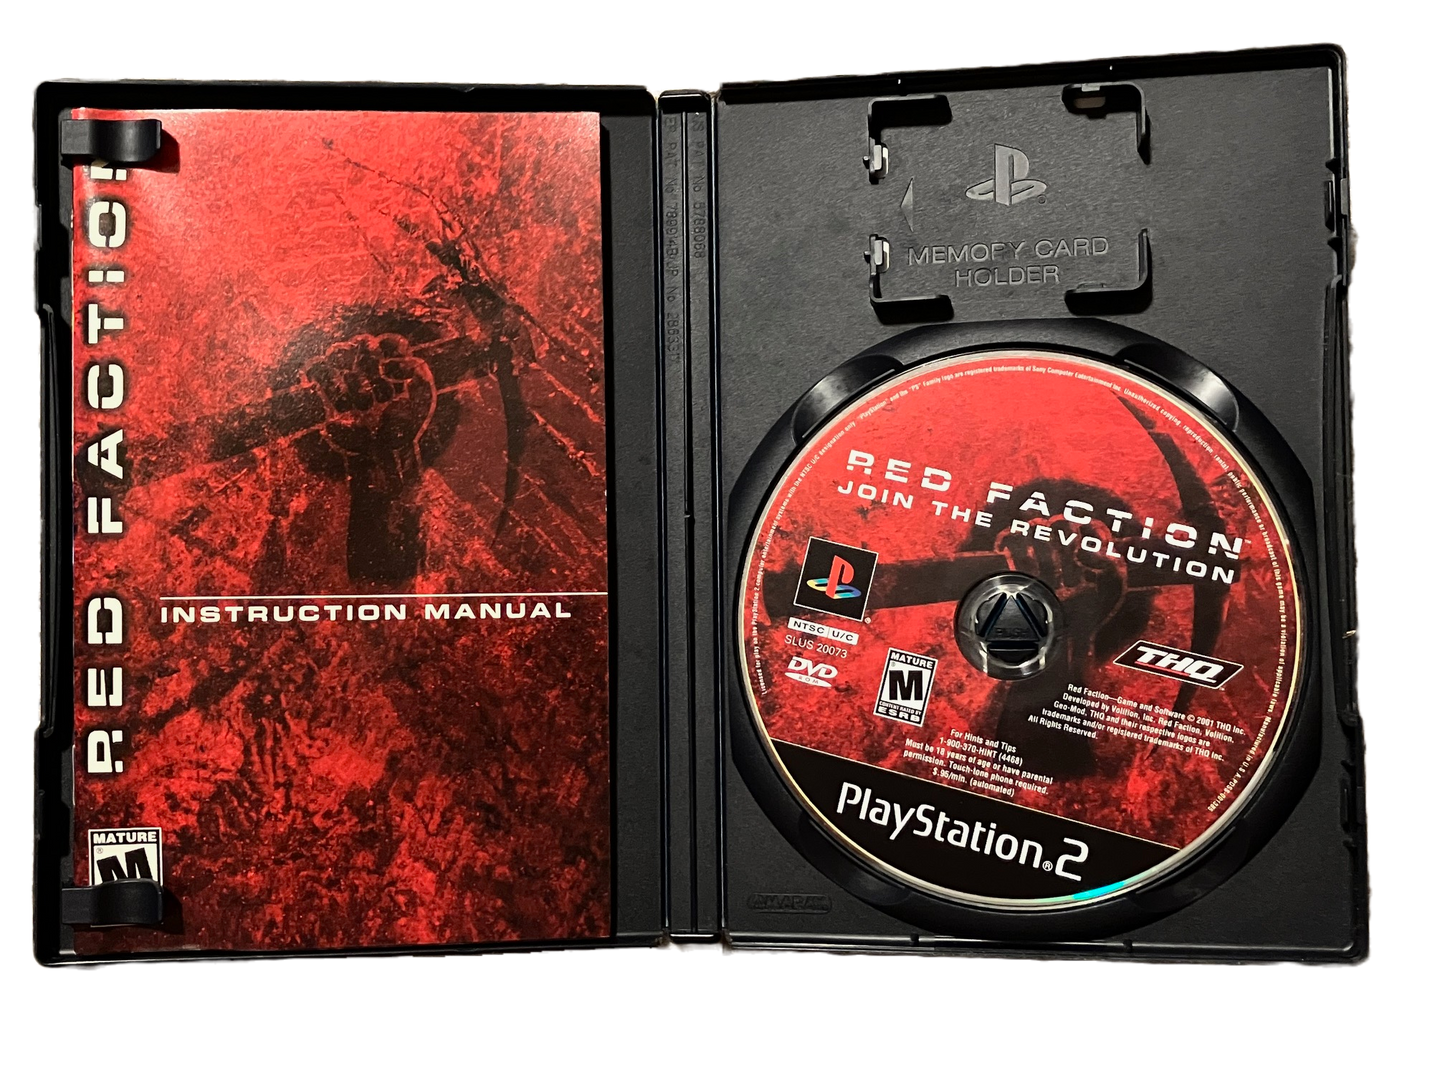 Red Faction Sony PlayStation 2 PS2 Complete